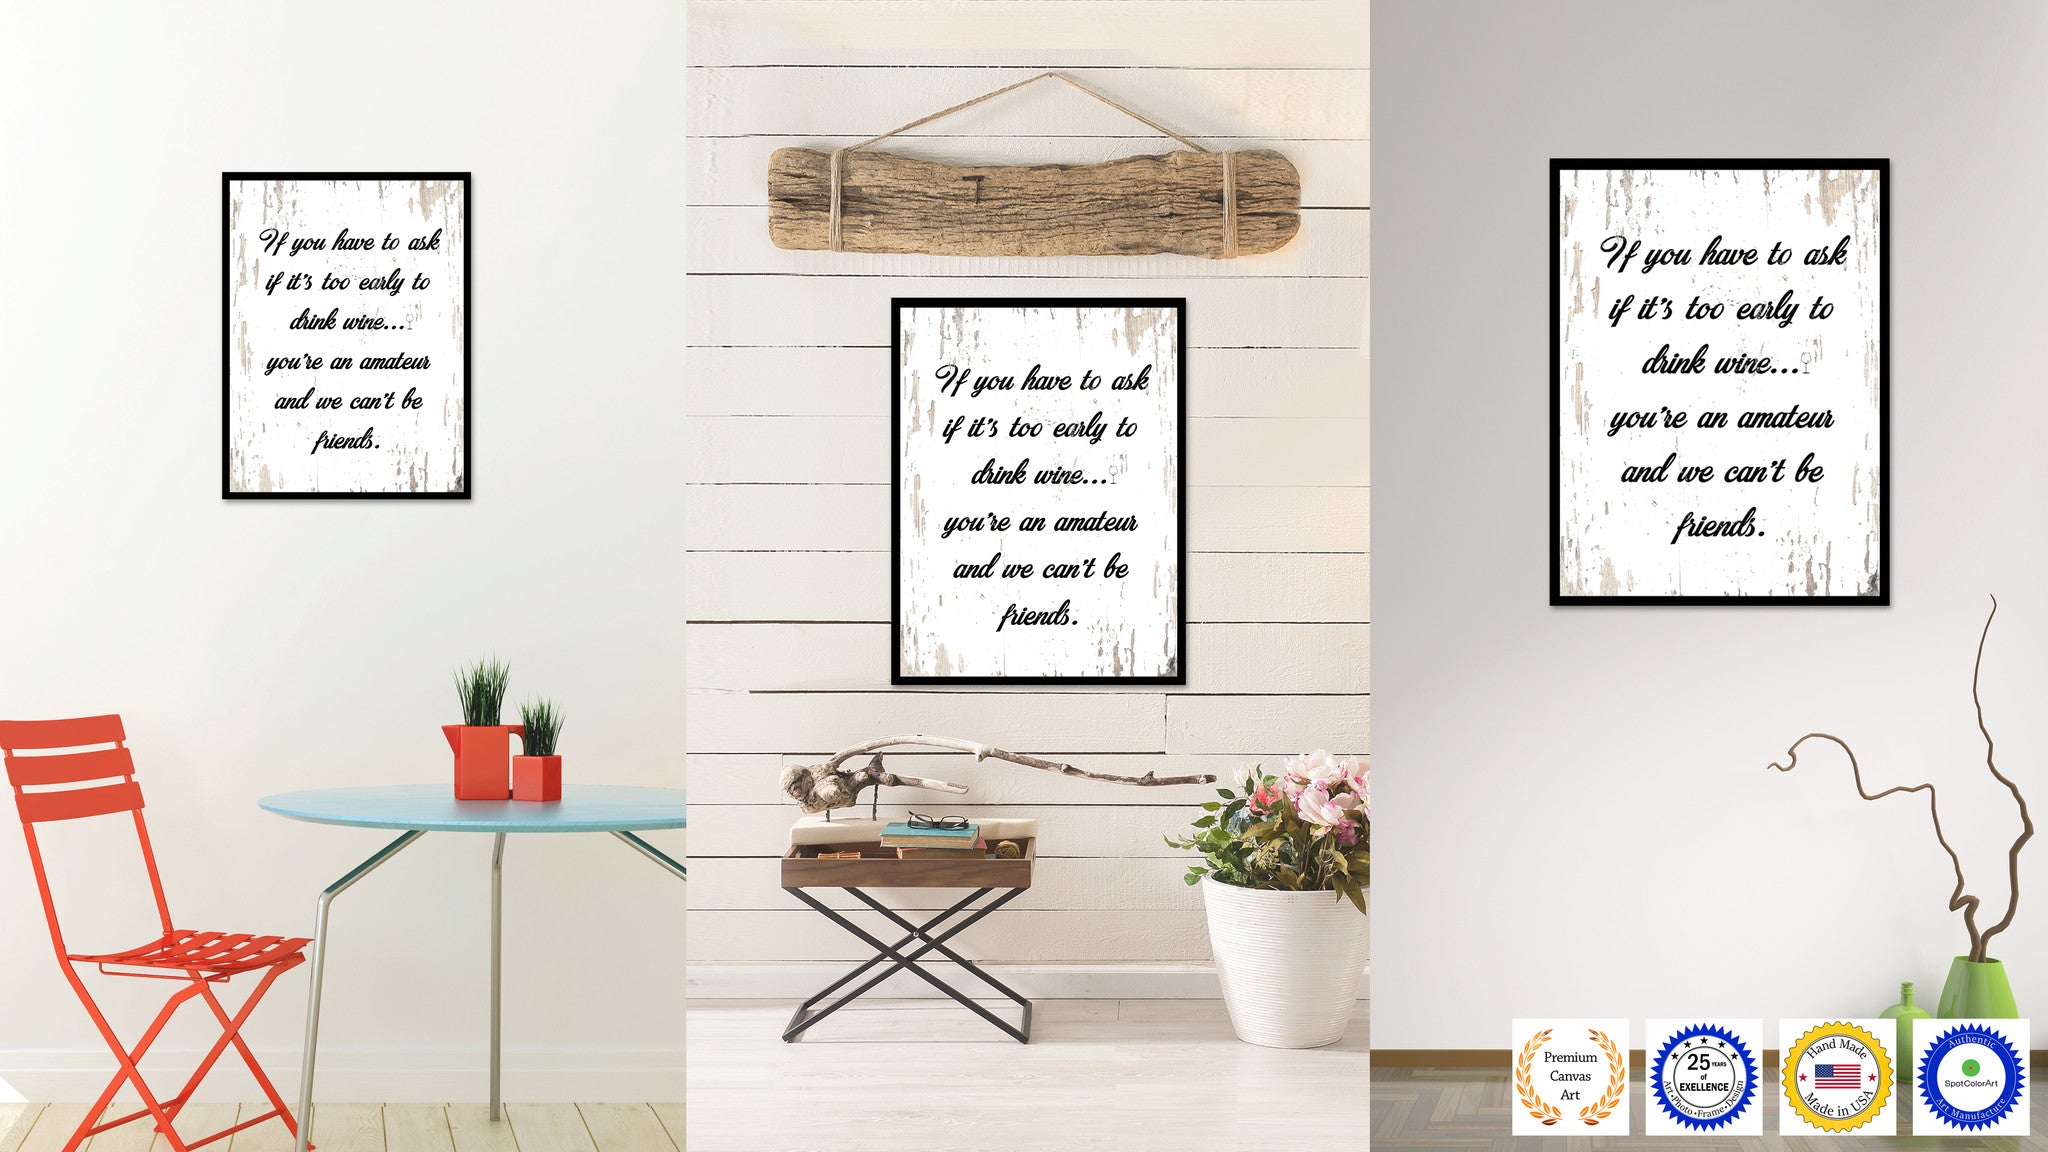 If You Have To Ask If It's Too Early To Drink Wine  You're An Amateur & We Can't Be Friends Quote Saying Canvas Print with Picture Frame